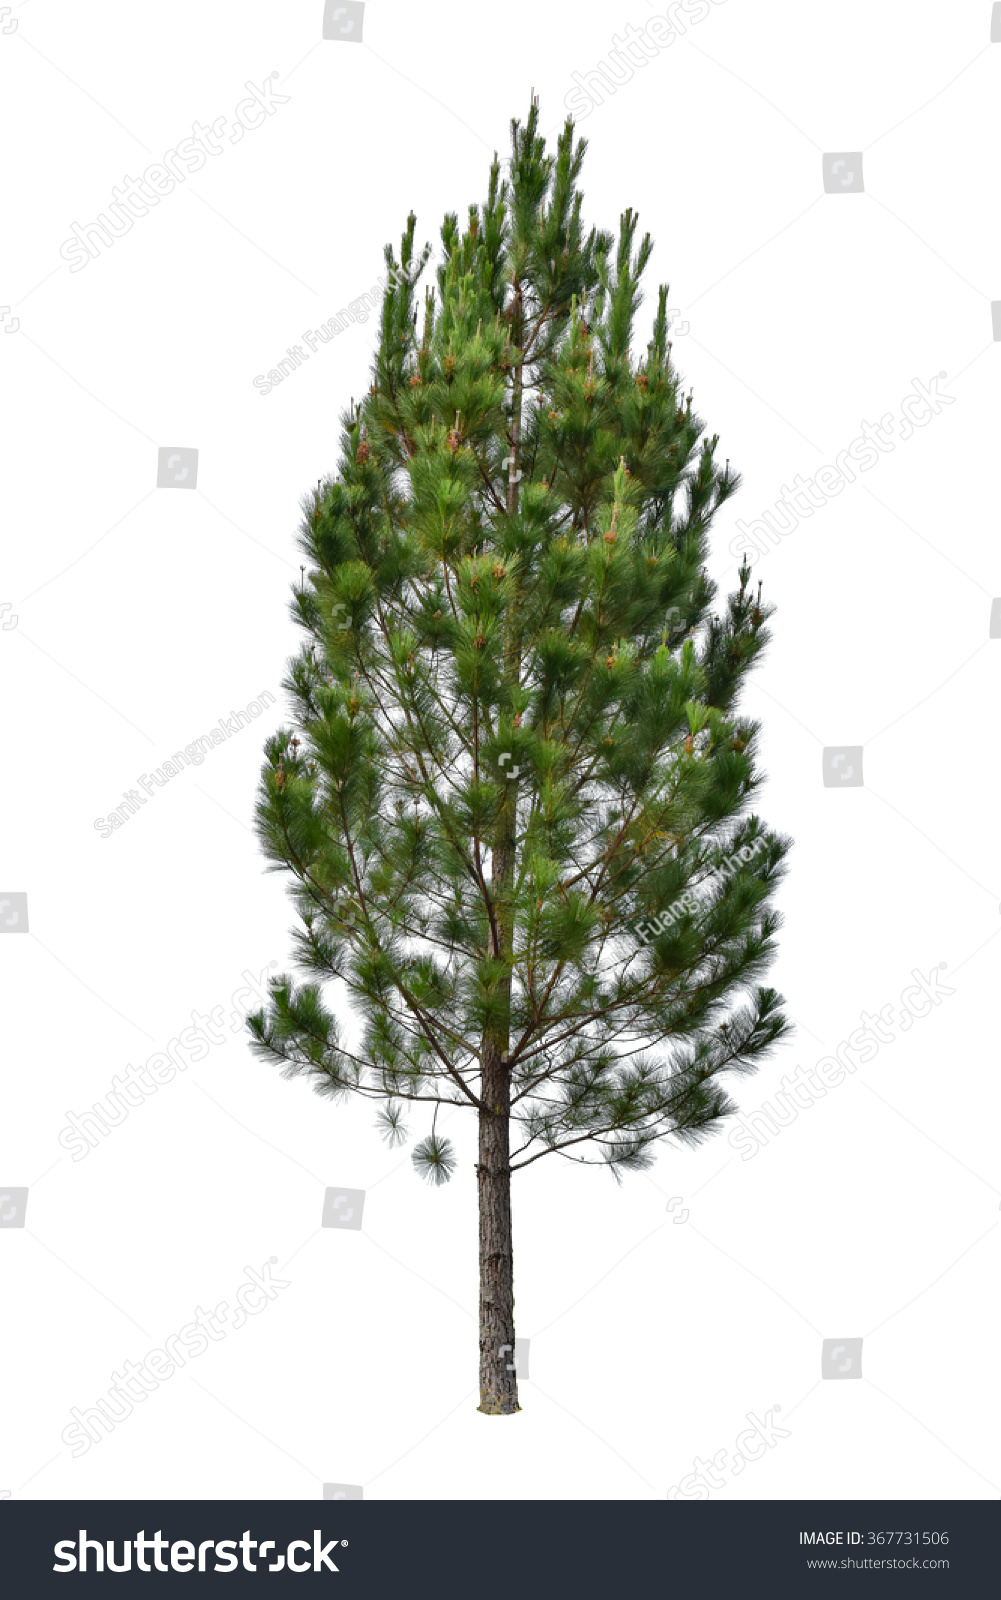 Pine tree isolated on white background. This has clipping path. #367731506